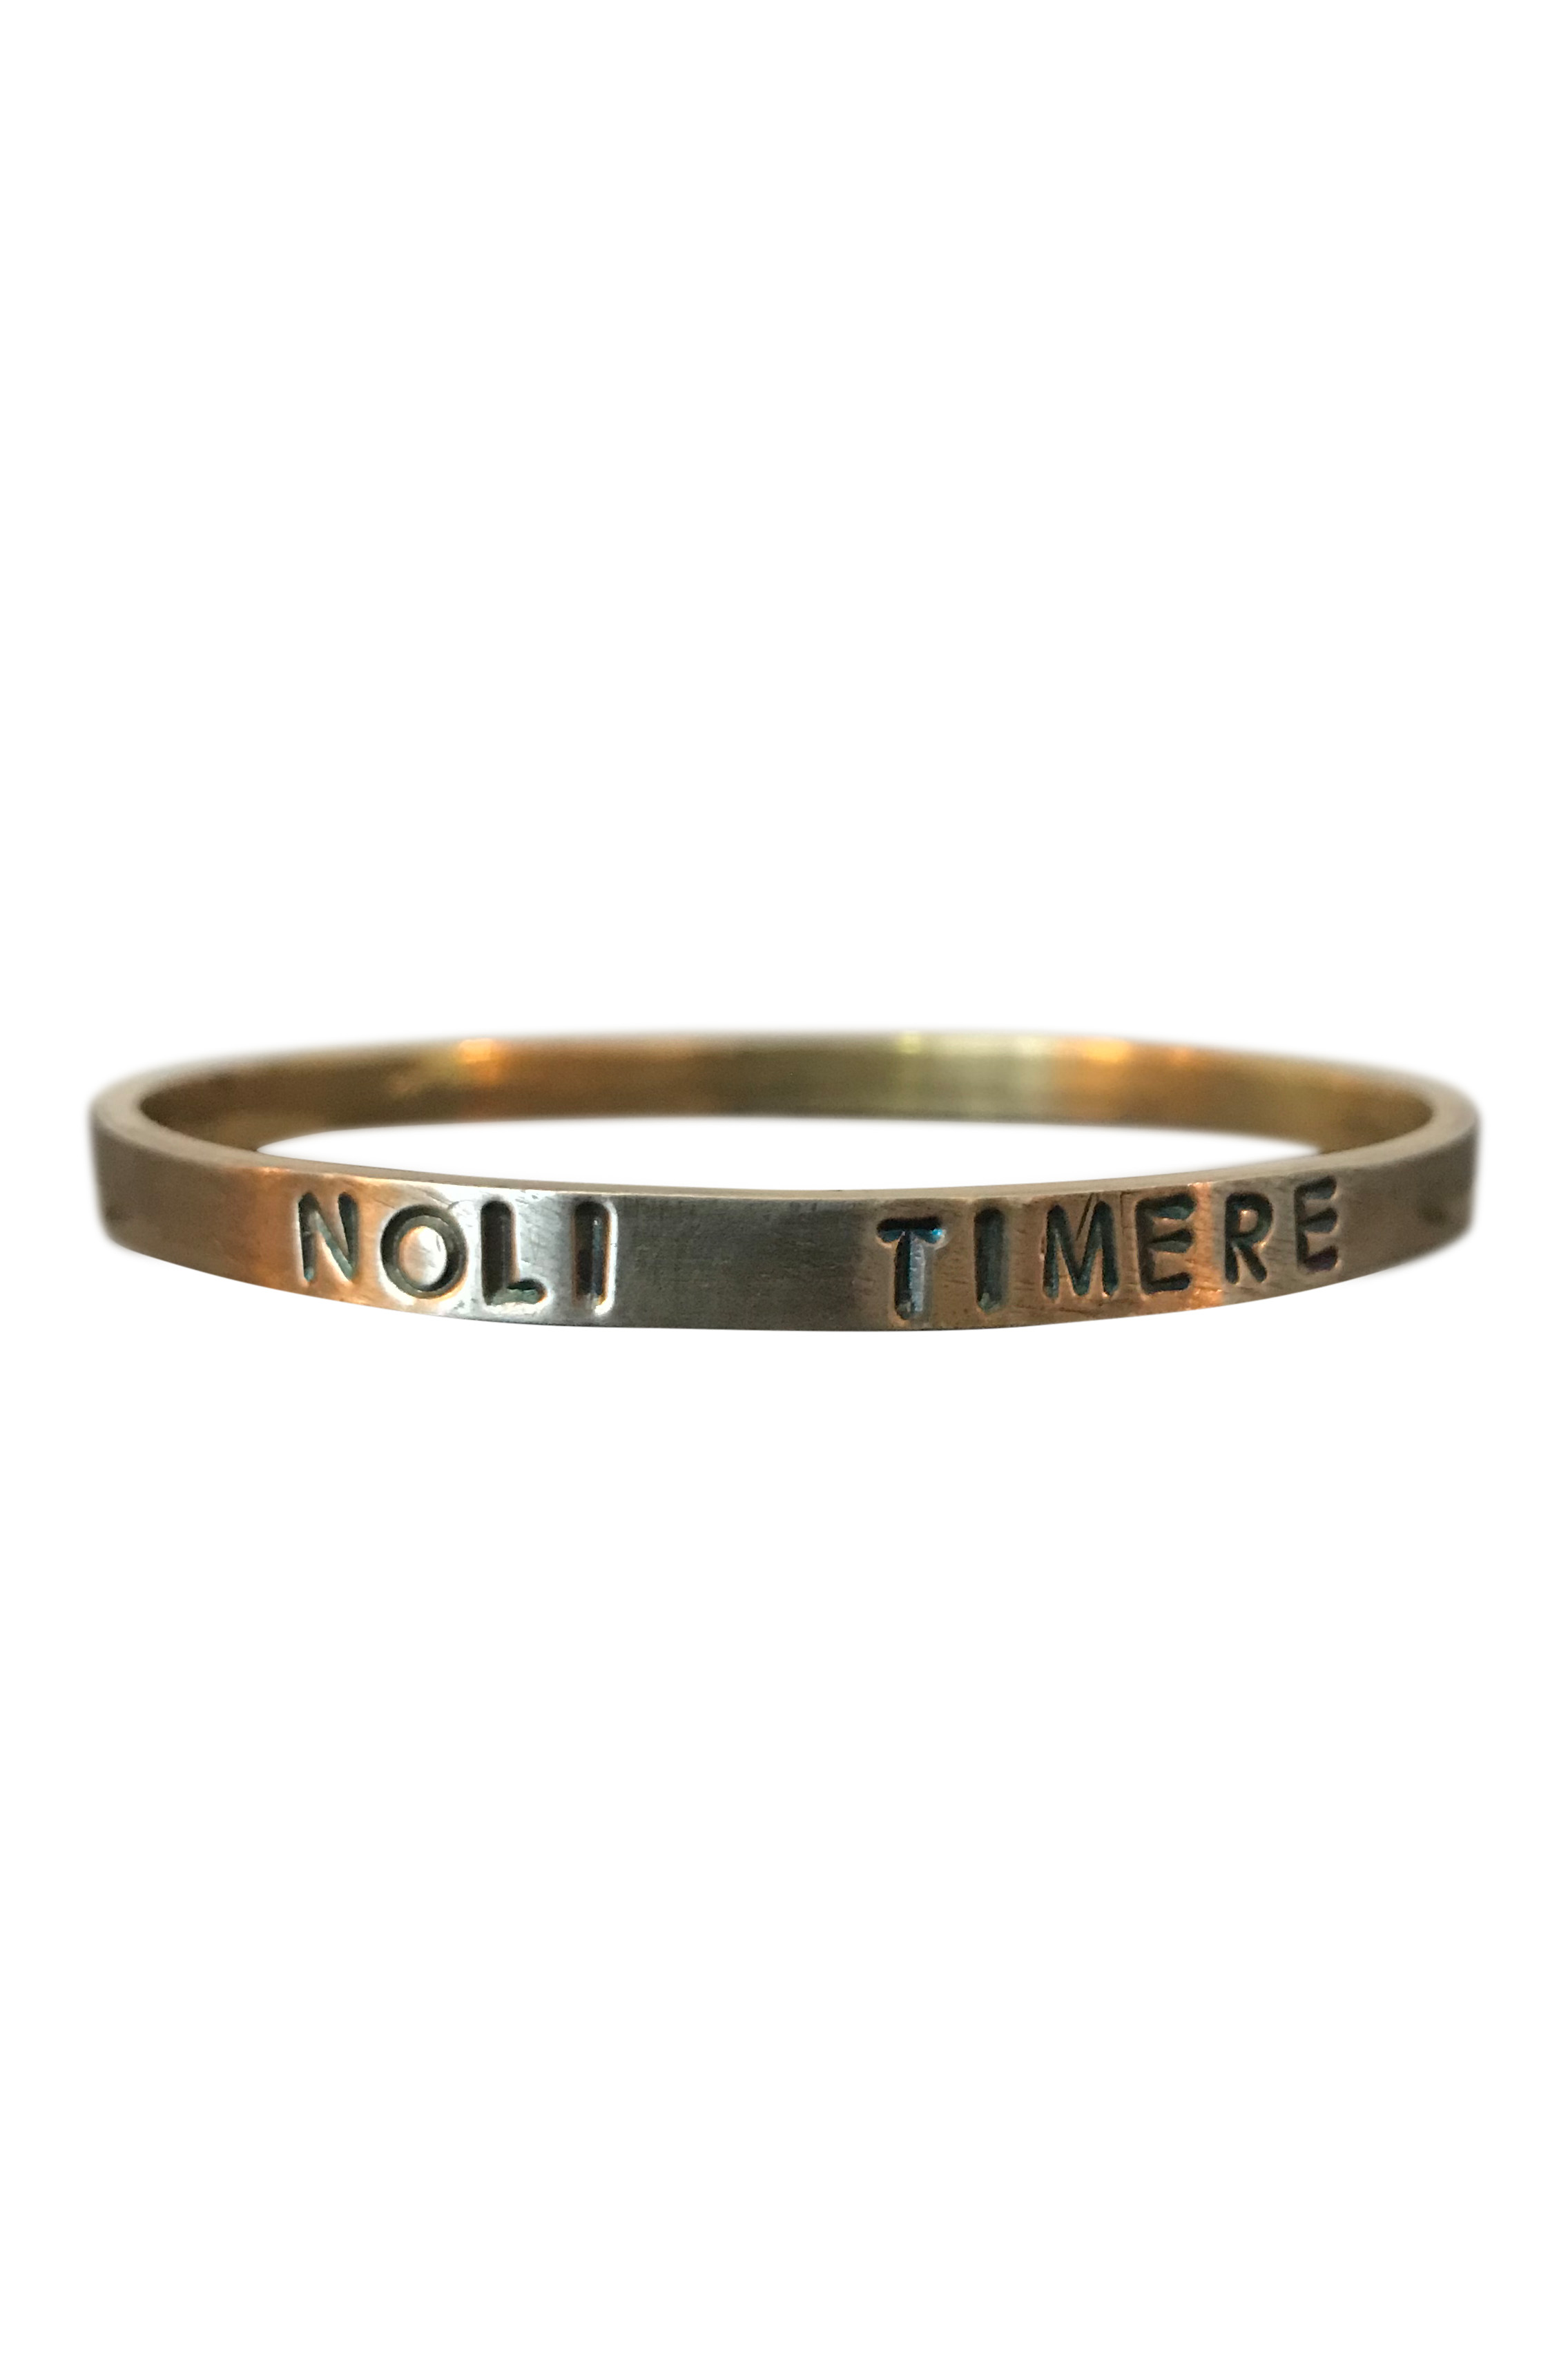 Window Dressing The Soul Oxidised Gold Plated Silver Bangle Noli Timere